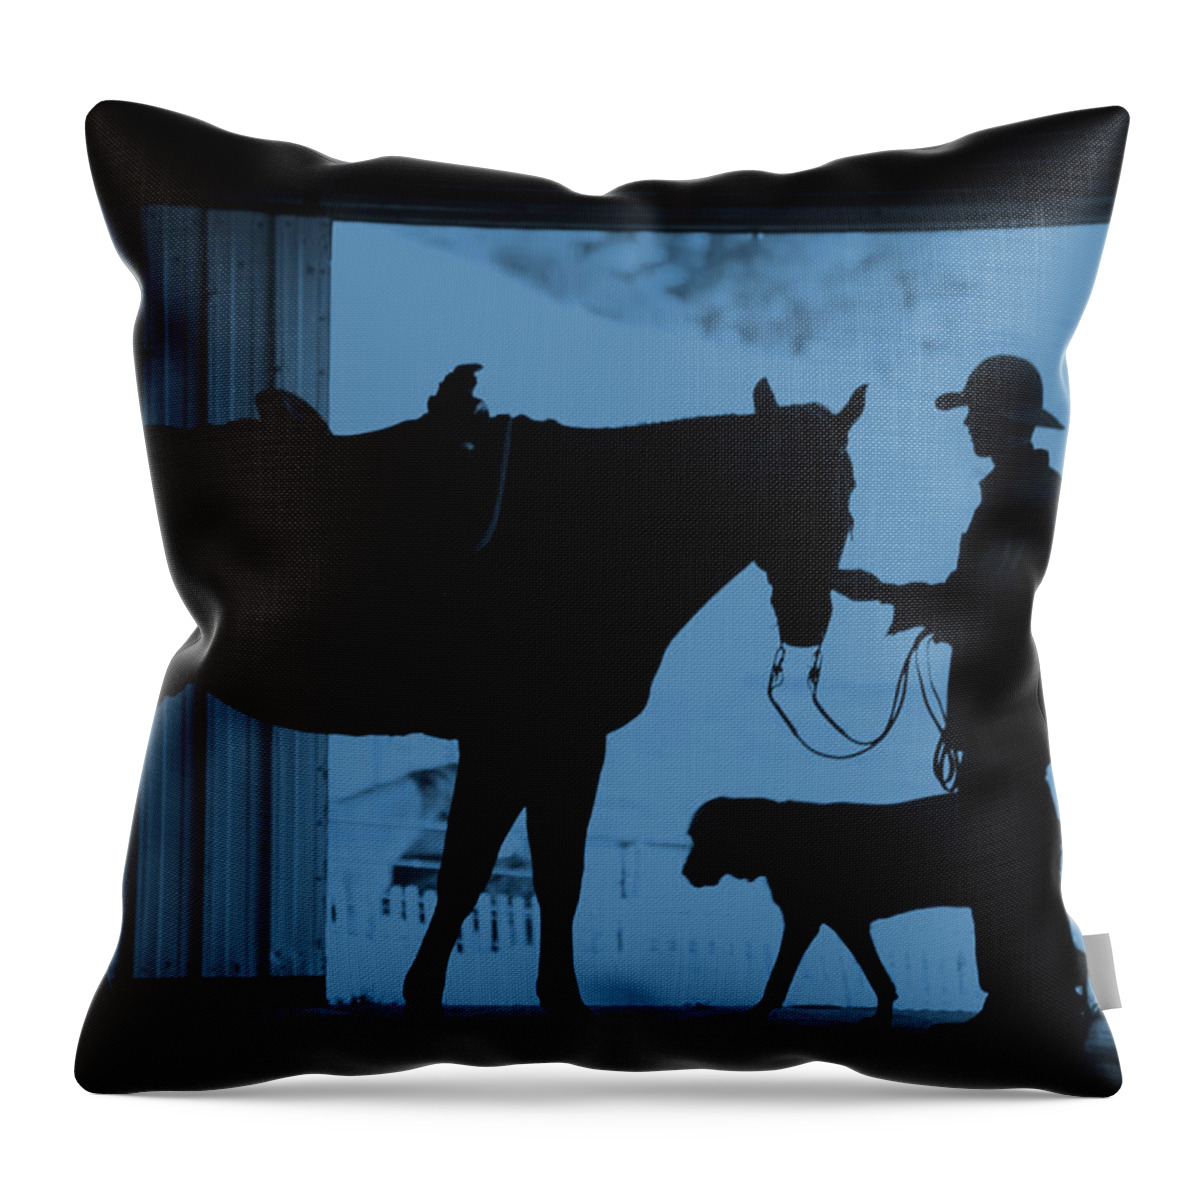 Made In America Throw Pillow featuring the photograph First Light by Steven Bateson